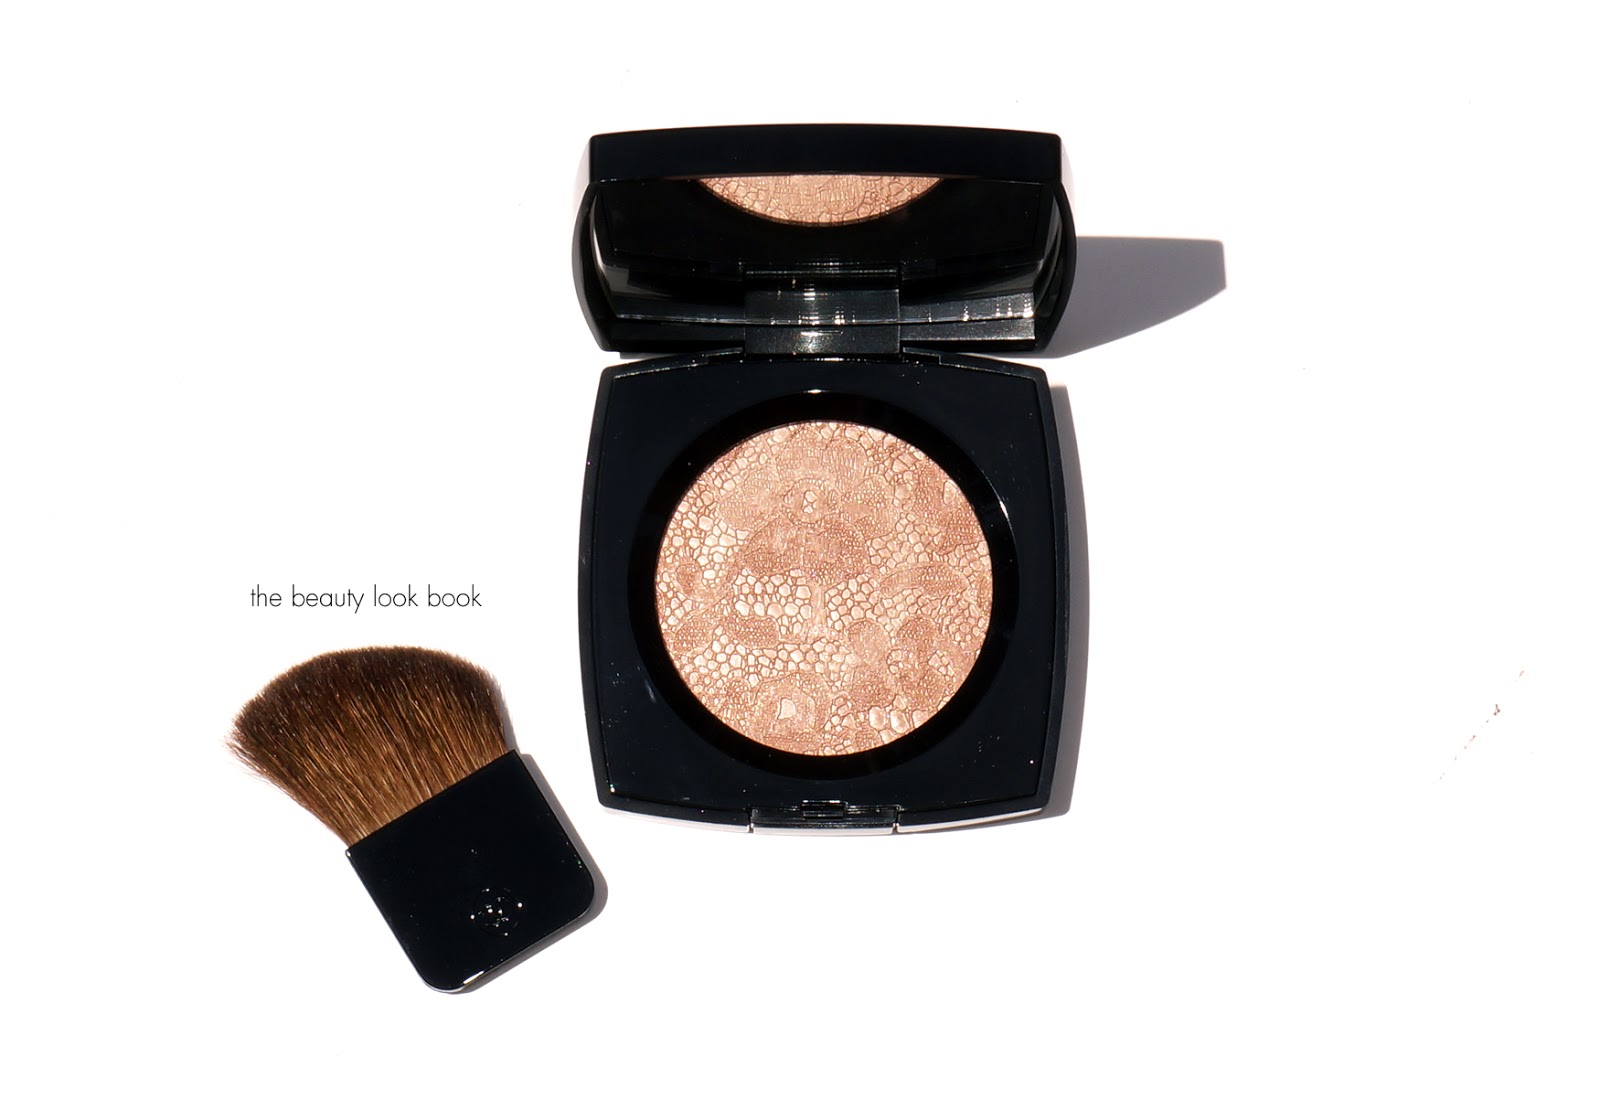 Chanel Dentelle Précieuse Illuminating Face Powder - Nordstrom Anniversary  Beauty Exclusive - The Beauty Look Book